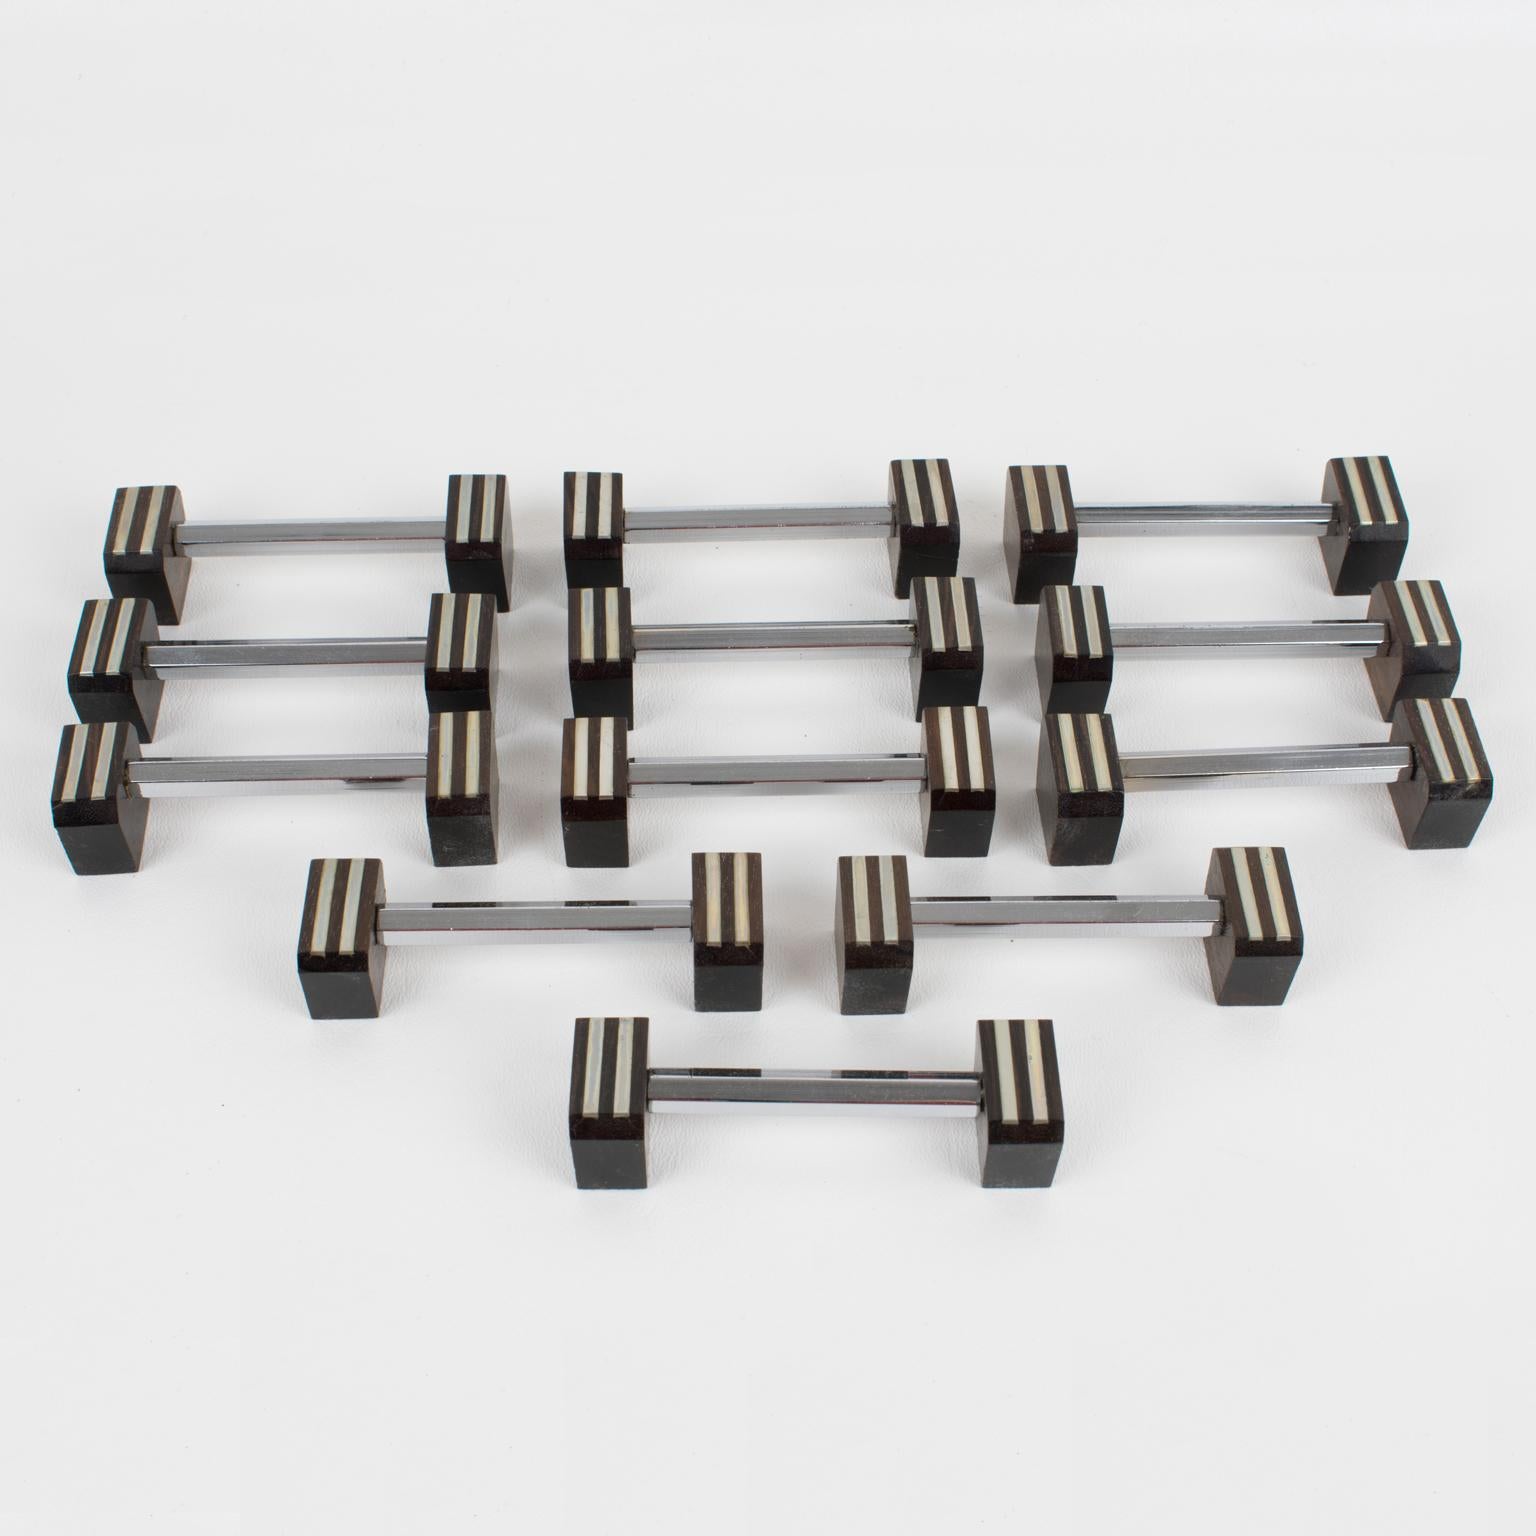 This elegant Art Deco set of twelve pieces in chrome and Macassar wood knife or chopstick rests was crafted in France in the 1930s. The modernist shape boasts a hexagonal metal stick bar and geometric carved wood sides. There is no visible maker's